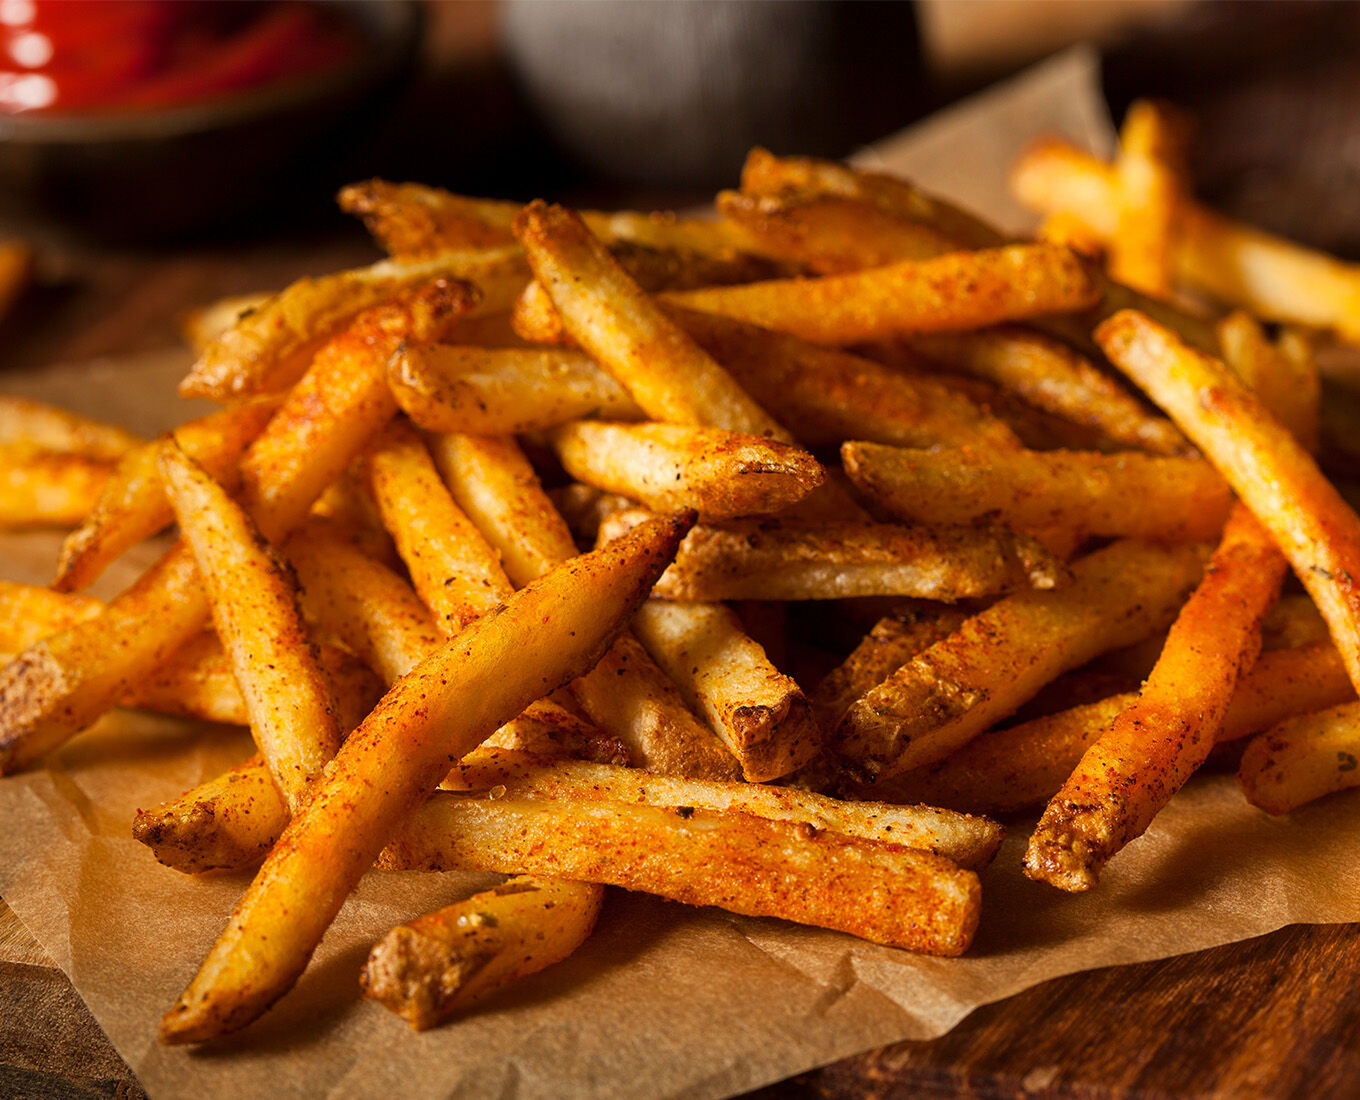 These French Fries Makers Will Help You Slice Potatoes Like A Pro